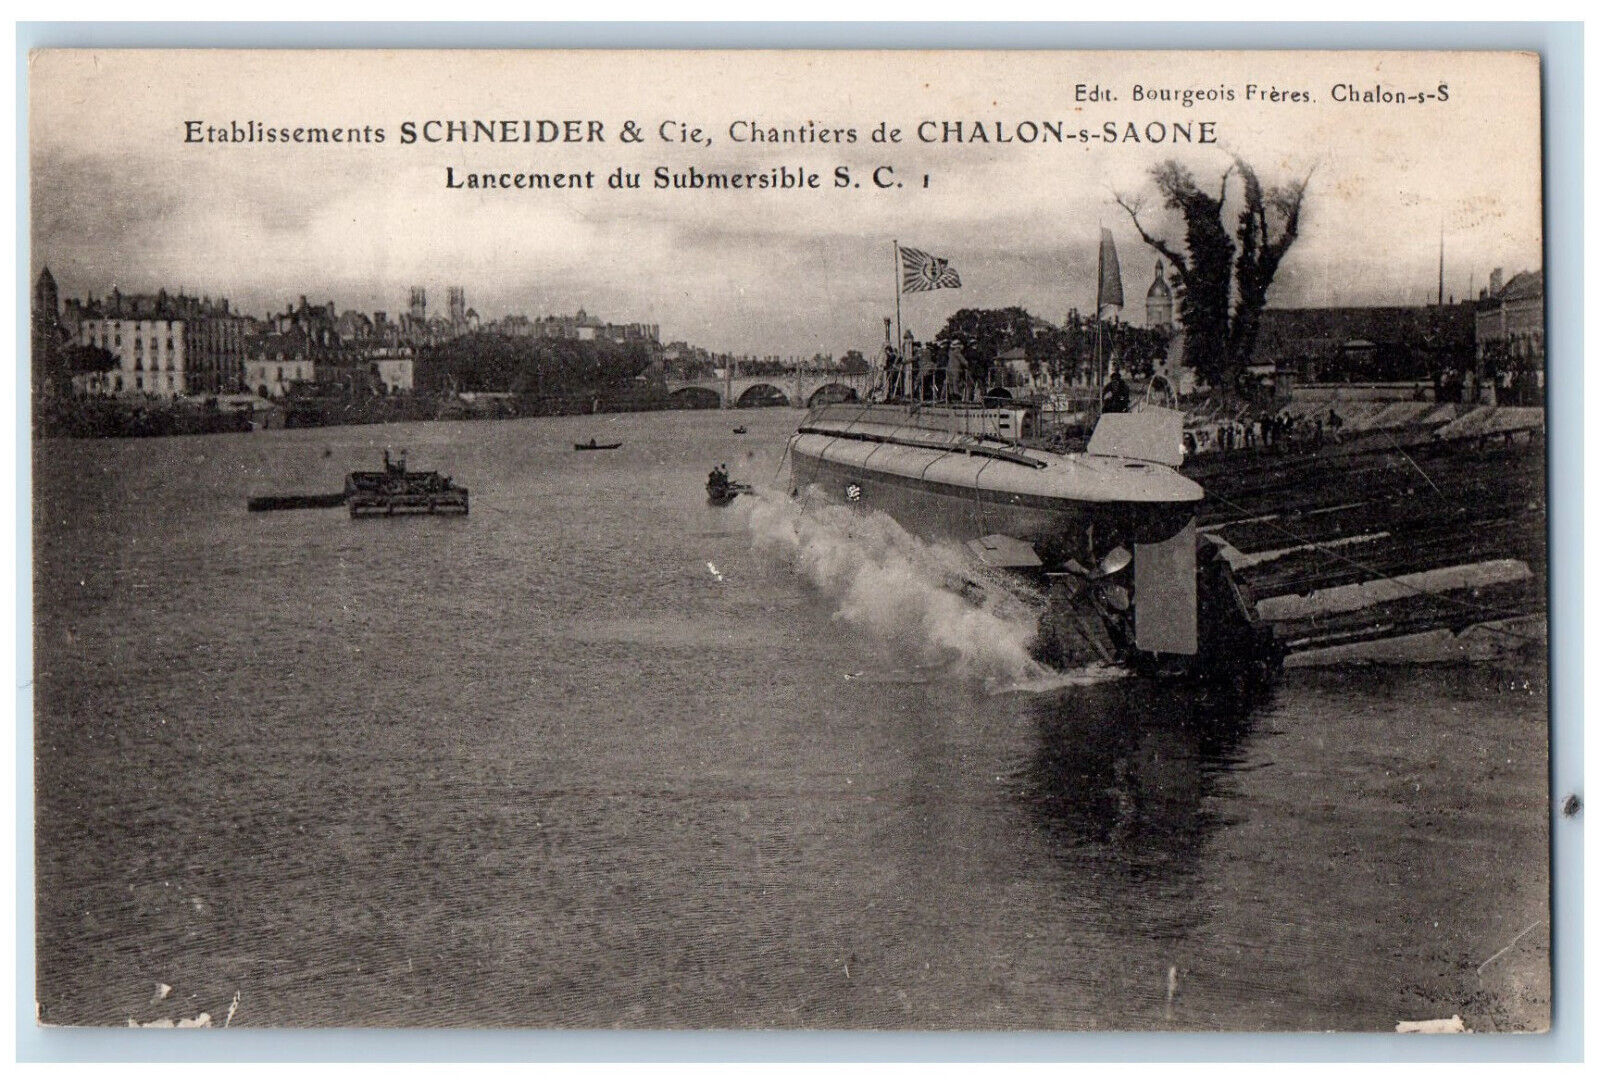 Chalon-s-Saone France Postcard Launch of SC Submersible Schneider & Cie c1910